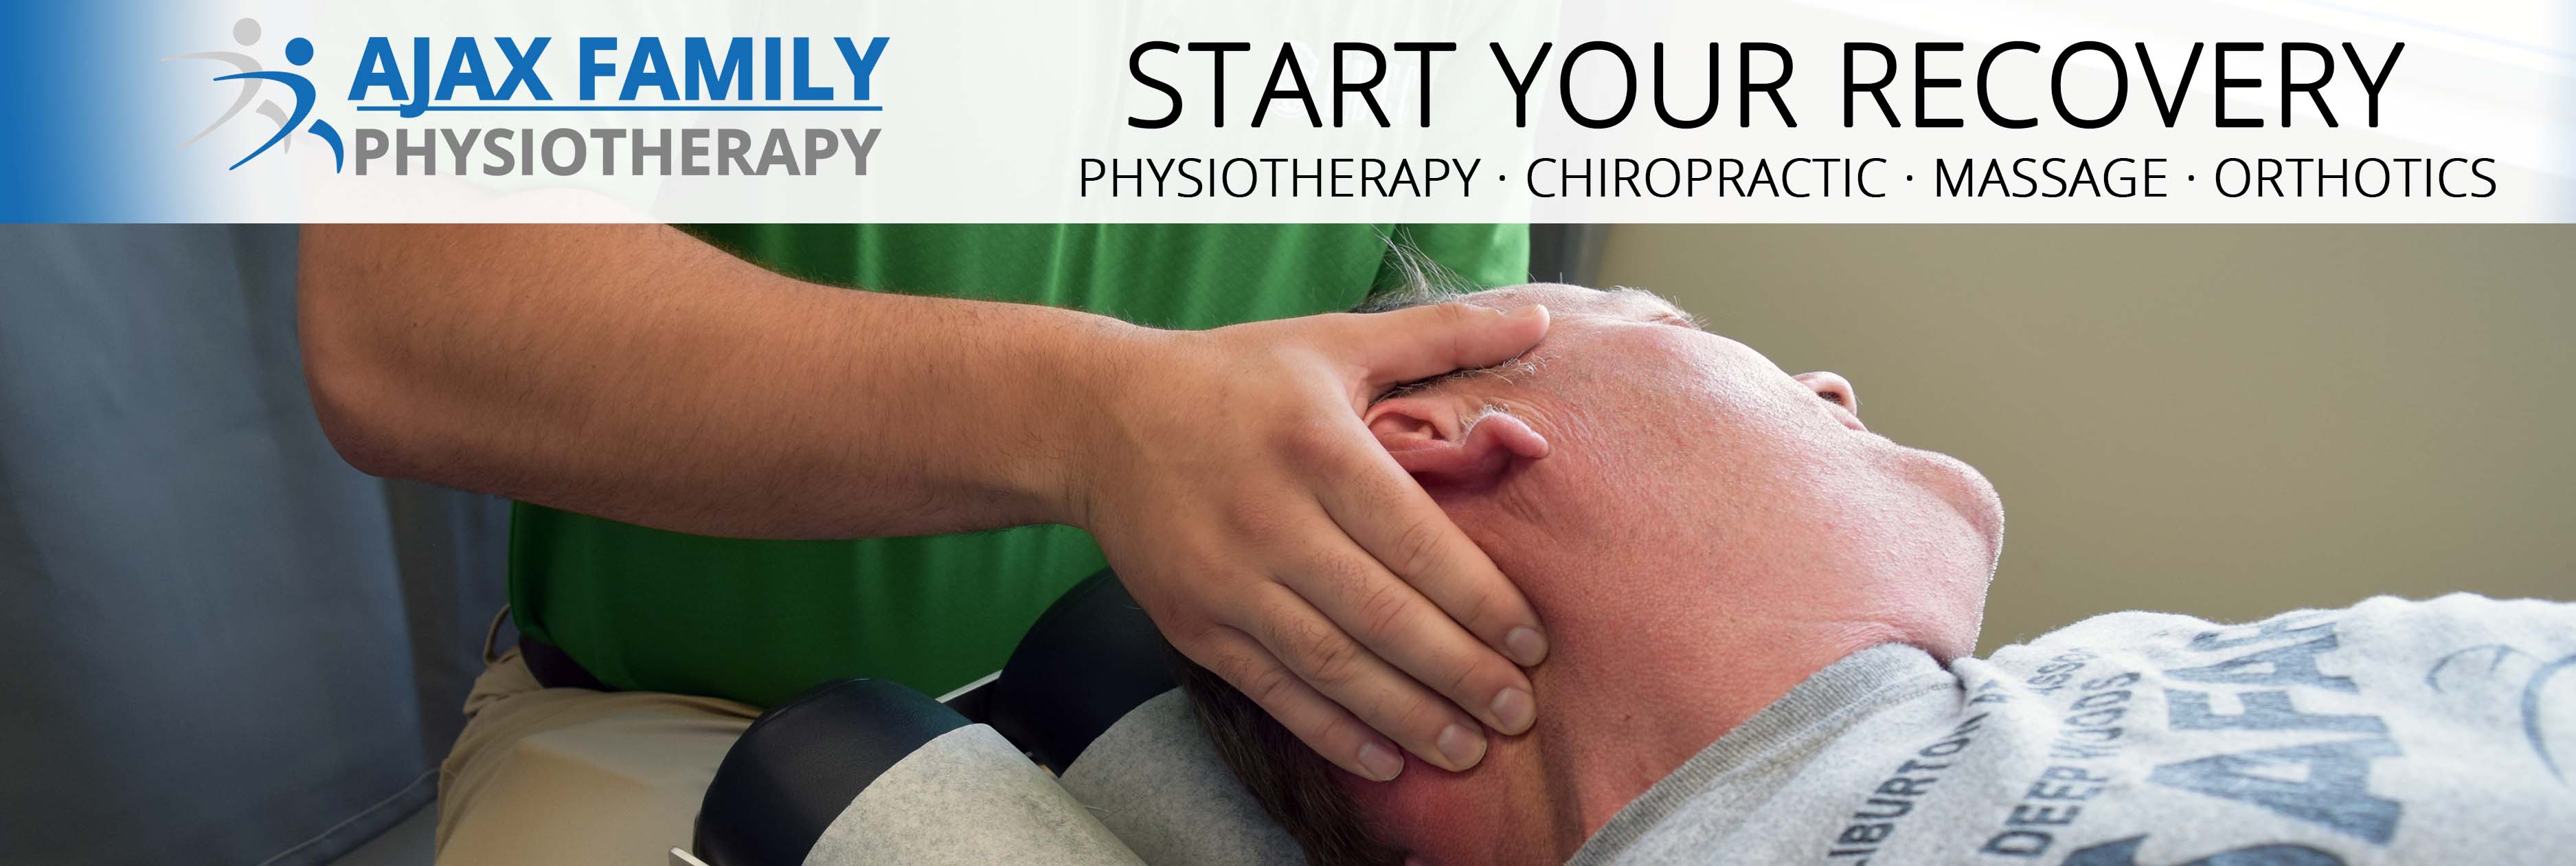 physiotherapist chiropractor massage therapy in ajax